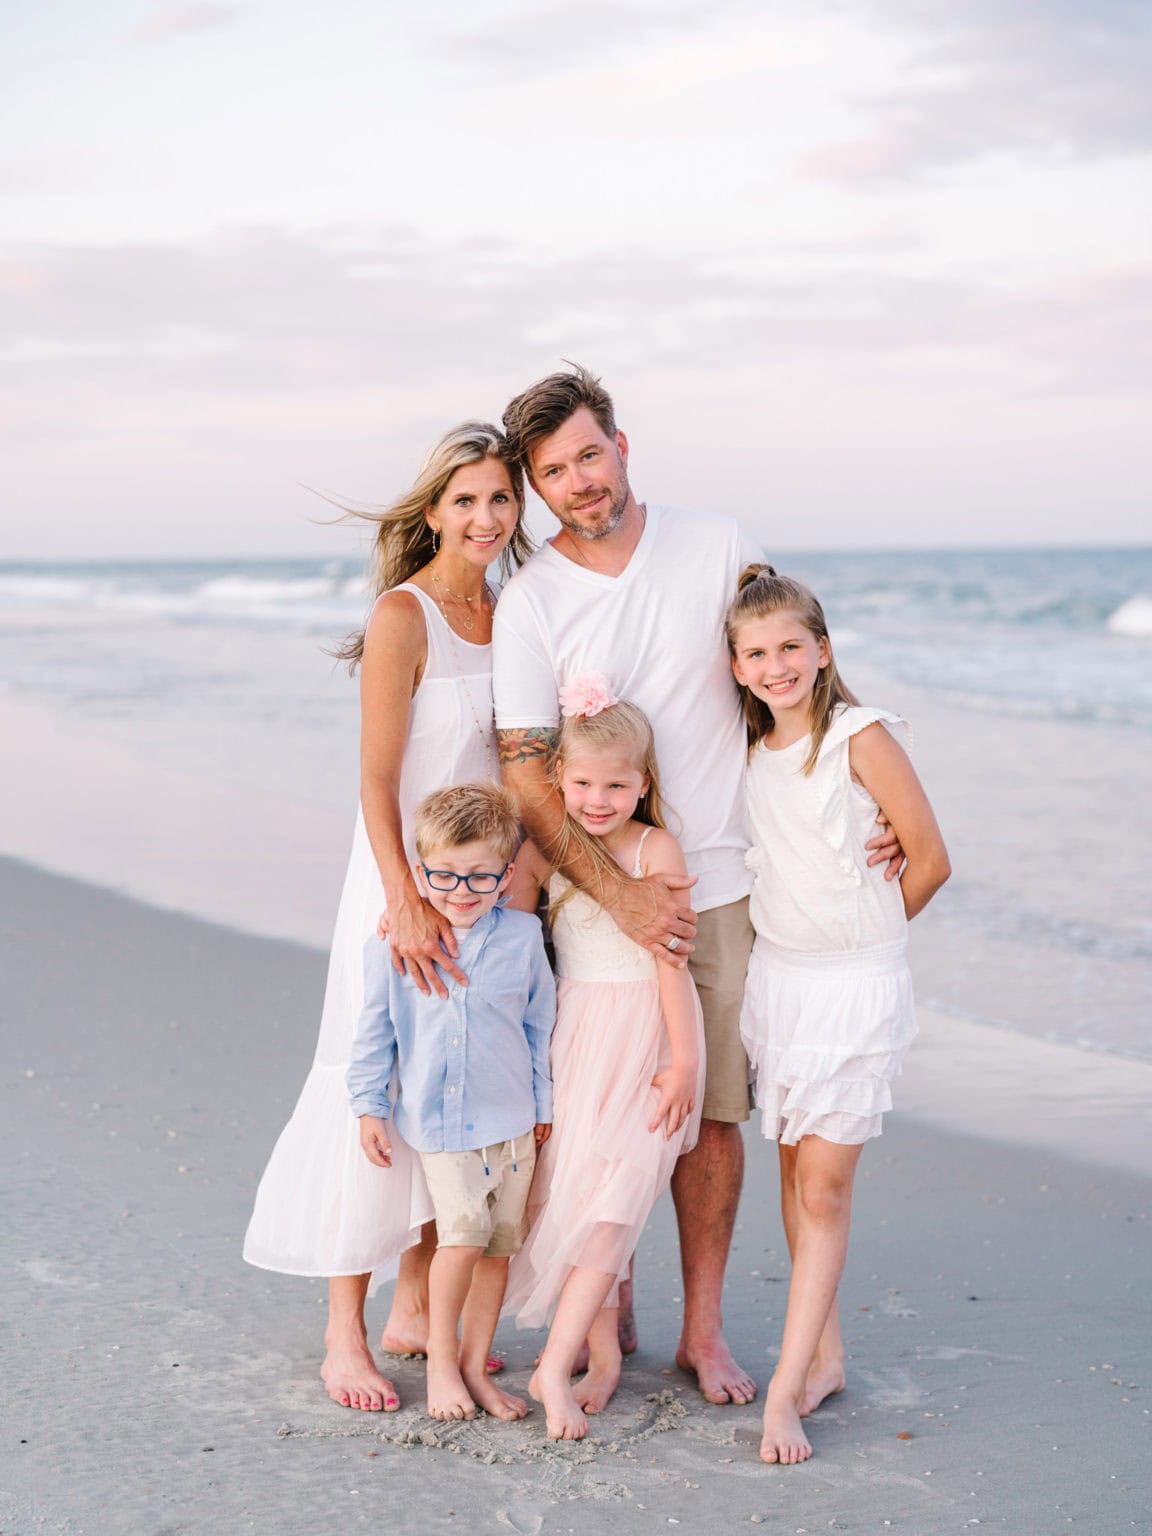 Blue, White, and Pink Outfit Ideas for Myrtle Beach Family Session